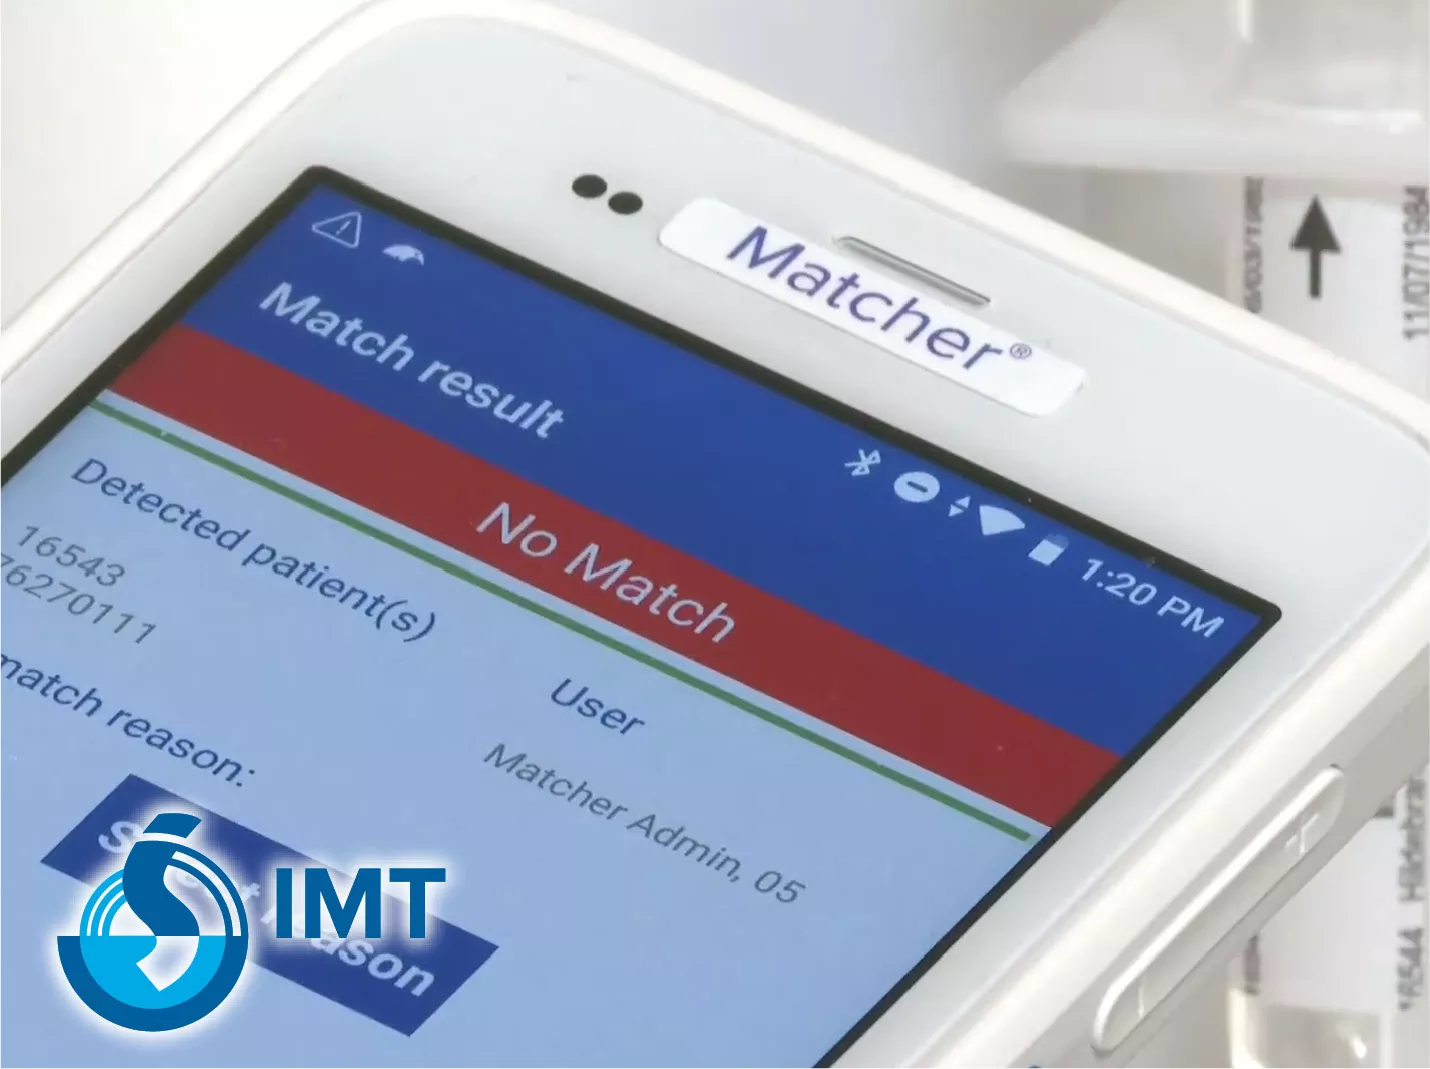 IMT Matcher IVF Electronic Witnessing System